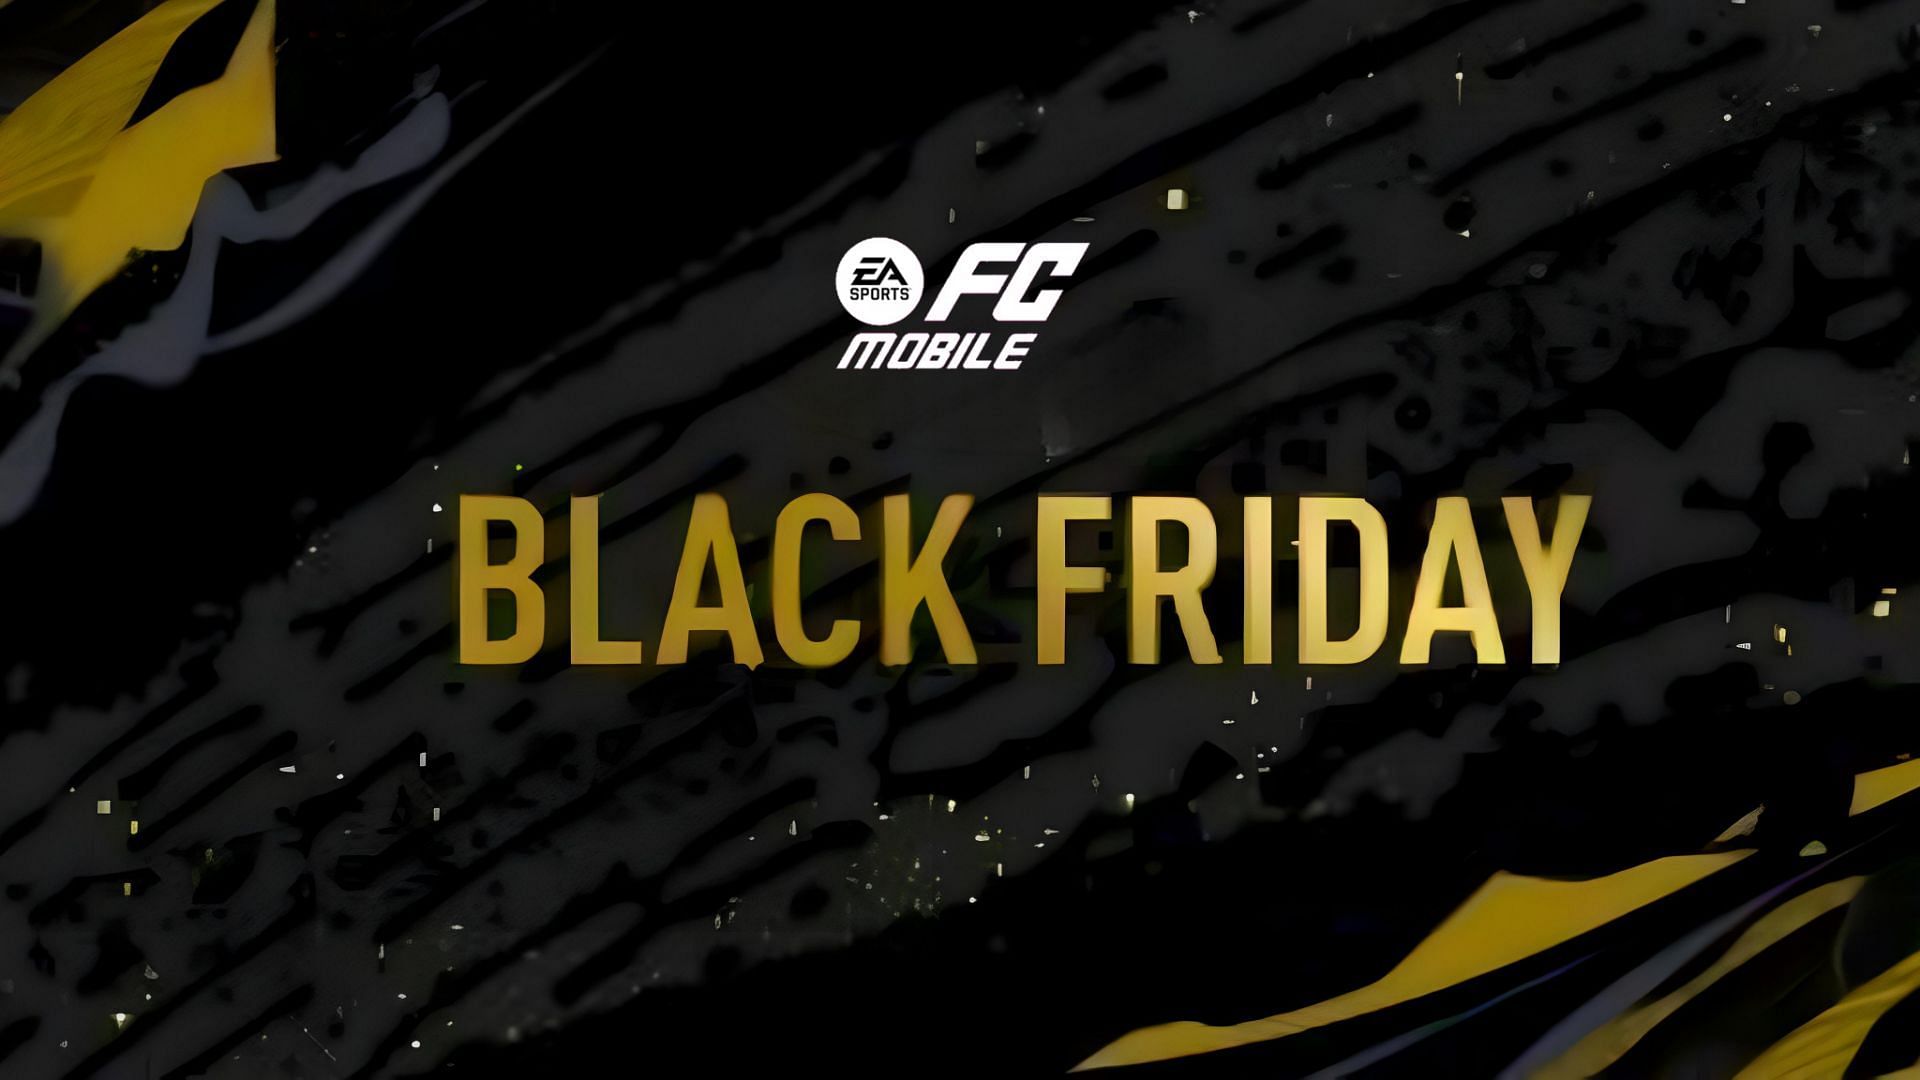 Black Friday event is live in FC Mobile (Image via EA Sports) 